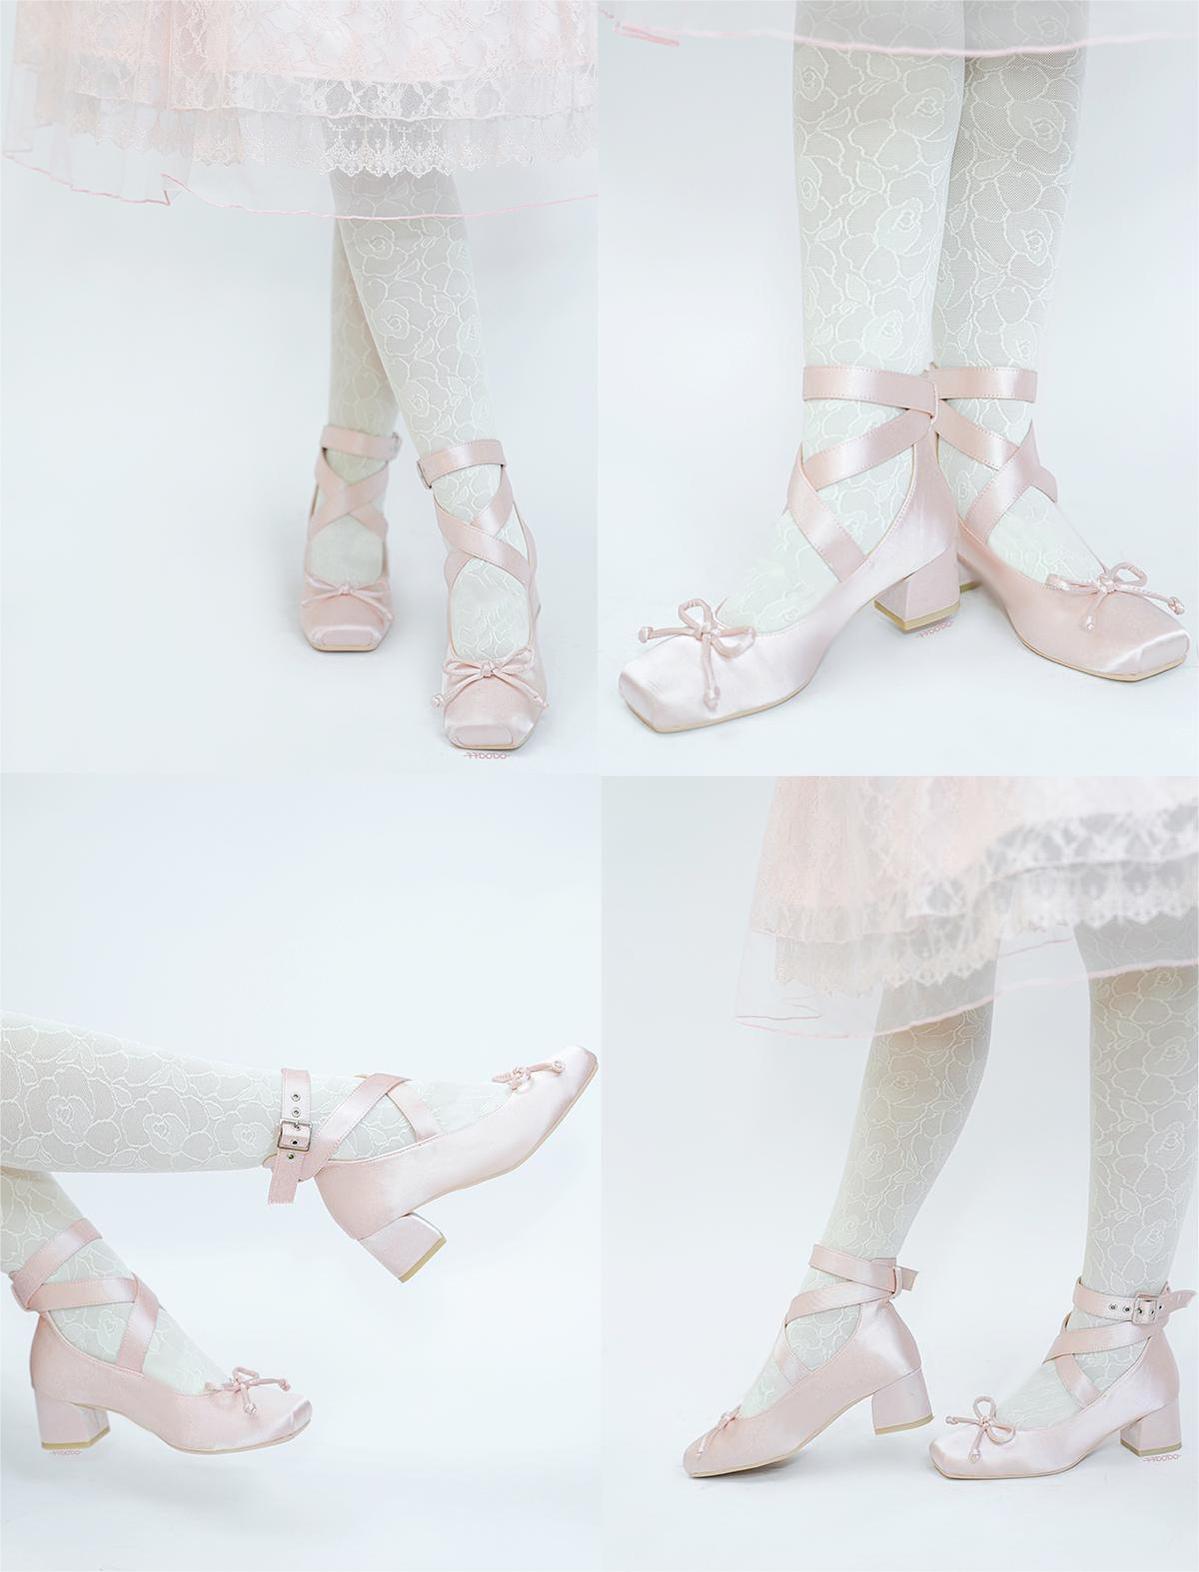 Lolita Shoes Ballet Style Square Toe Bow Heels Shoes 35592:543914